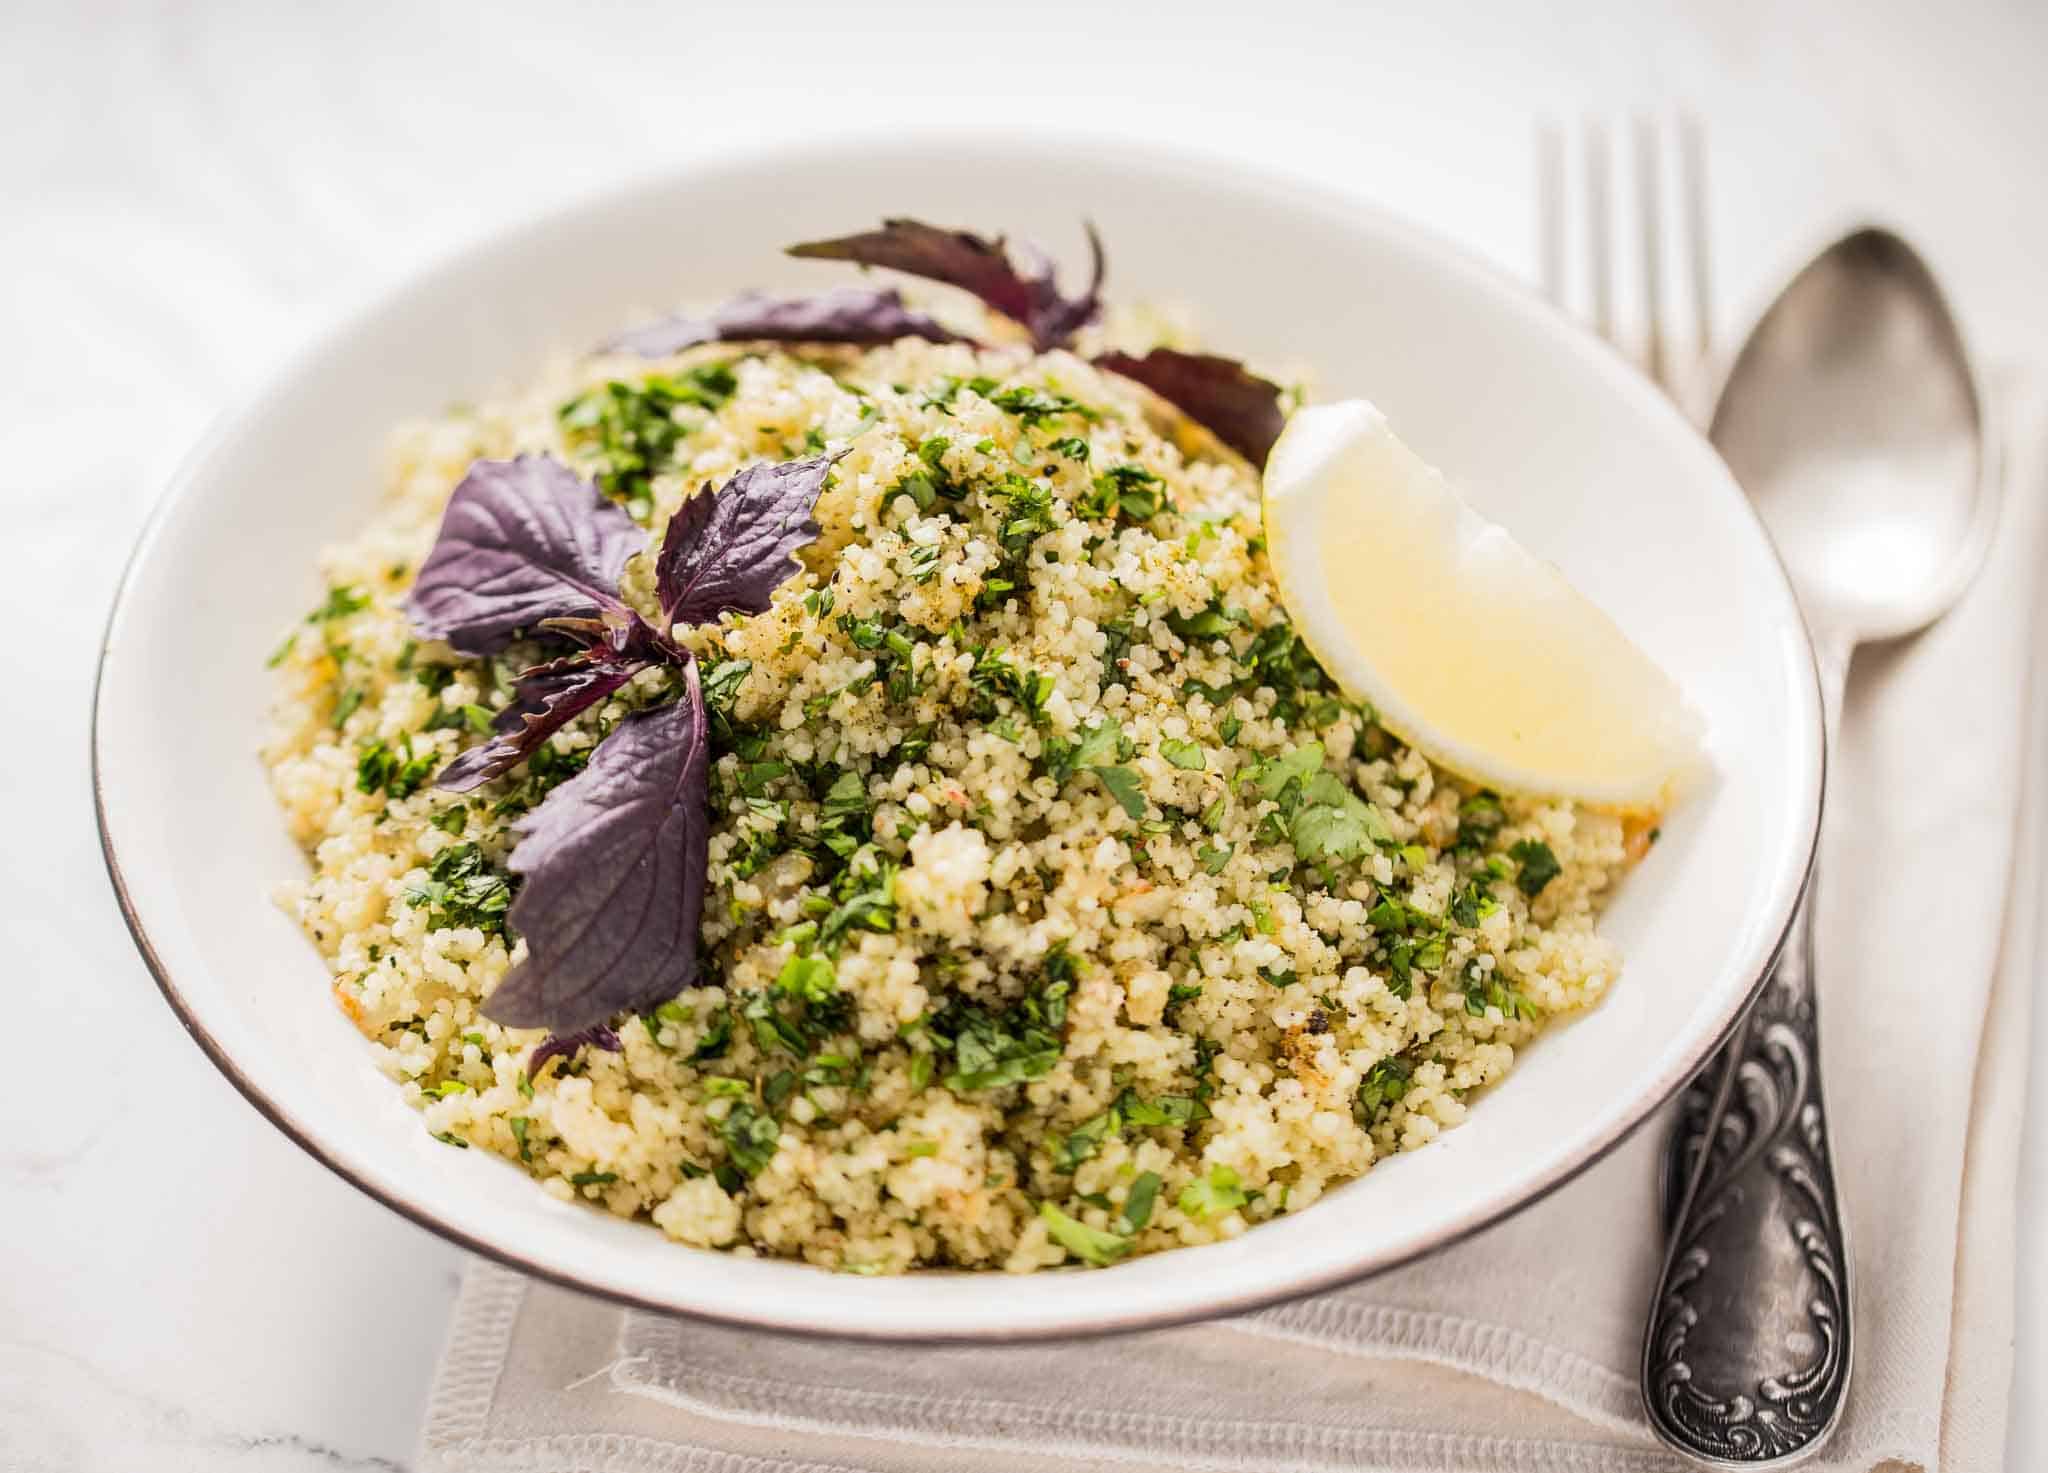 Perfectly cooked couscous can be a light snack by itself or a side dish for many other dishes like stews and curries. This incredibly easy couscous recipe takes less than 15 minutes to cook and one sure to bookmark as a favourite.